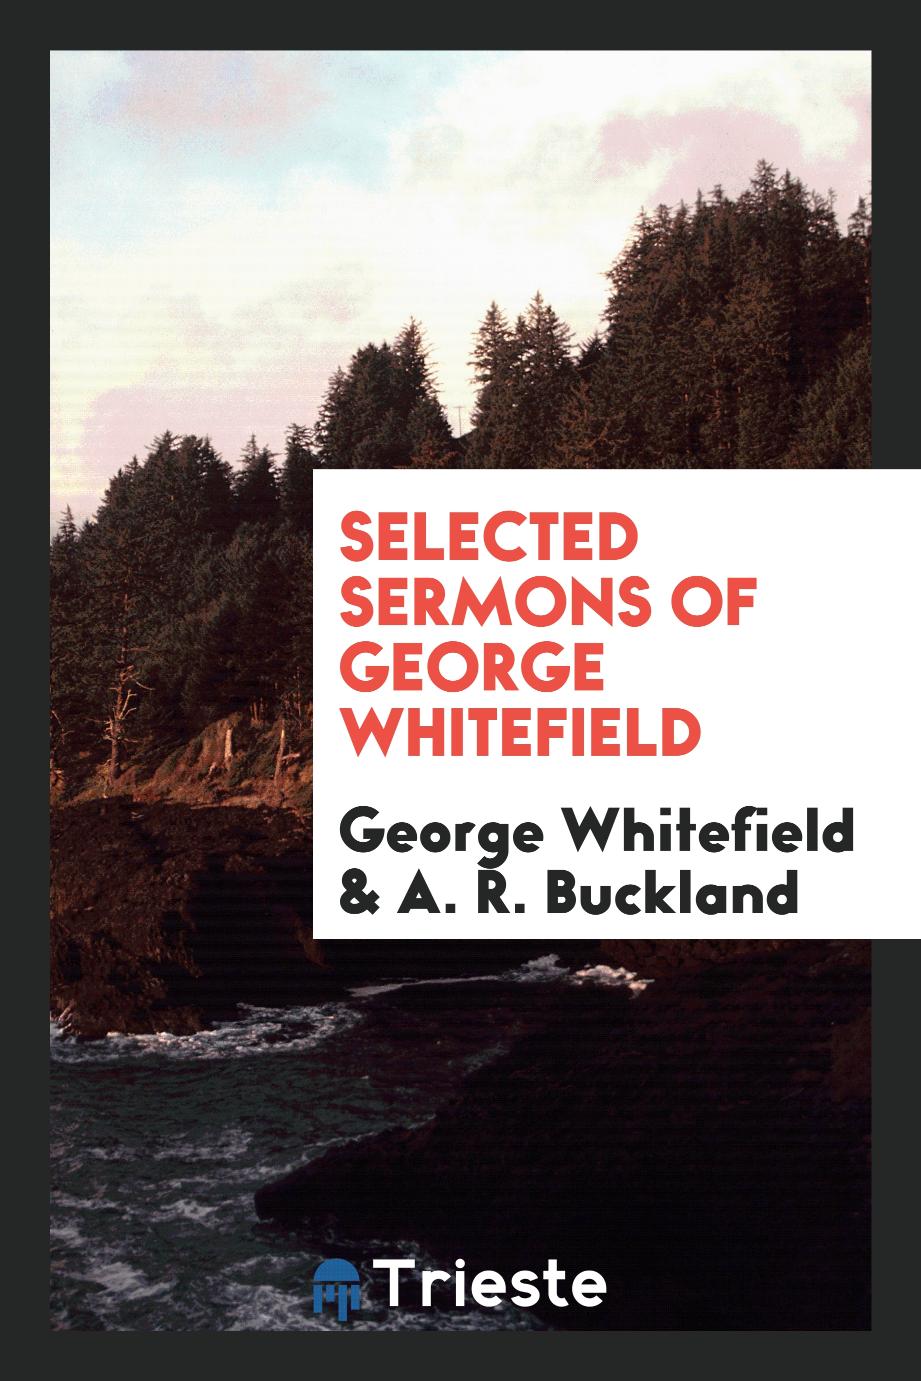 Selected Sermons of George Whitefield